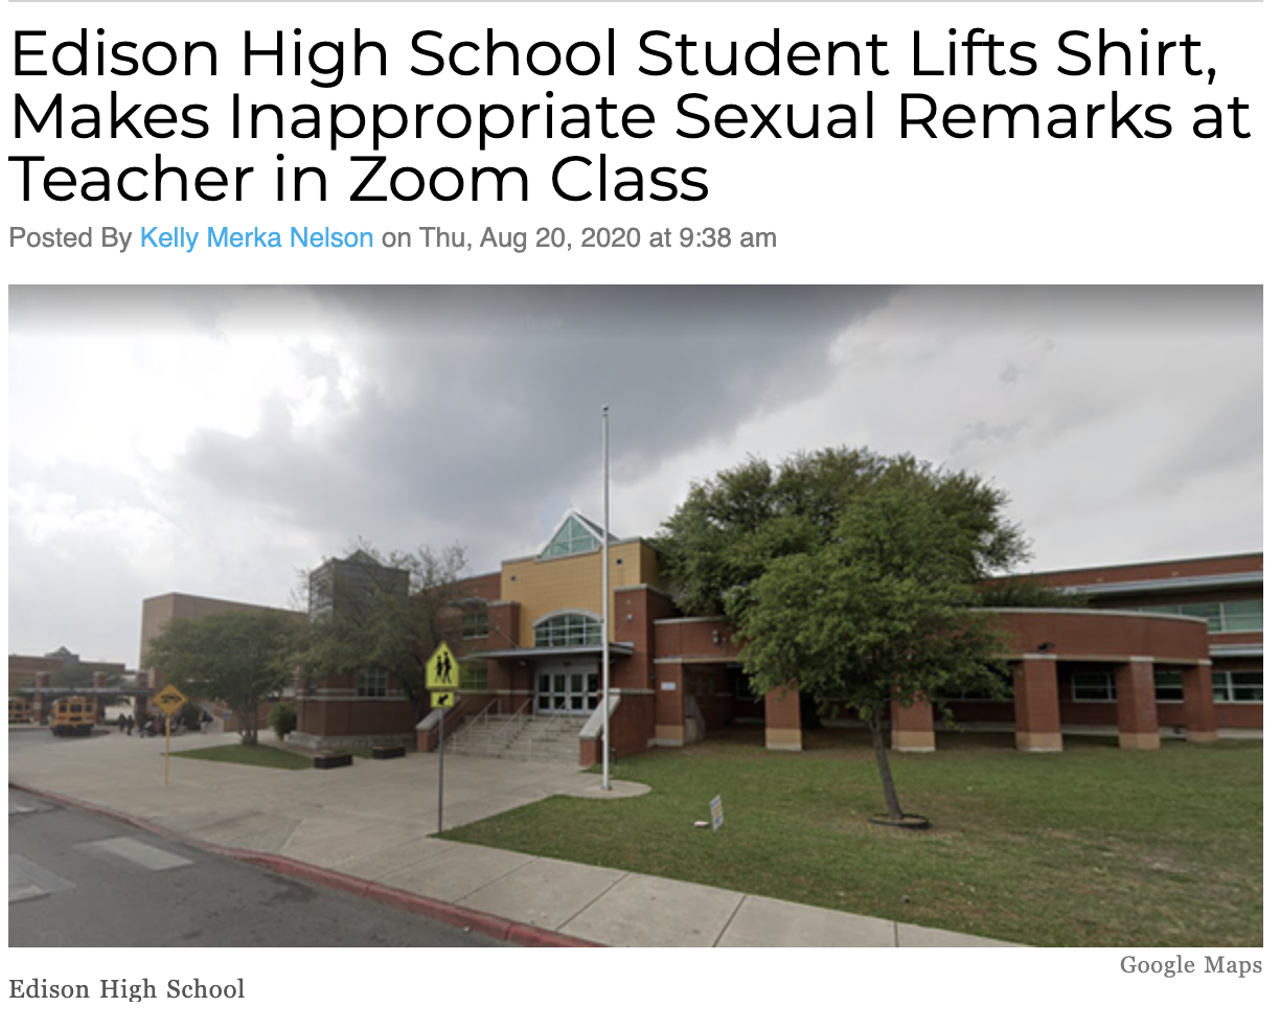 All the hemming and hawing about virtual learning may not have predicted a major problem allegedly faced by a teacher at Edison High School: sexual harassment. Read more here.